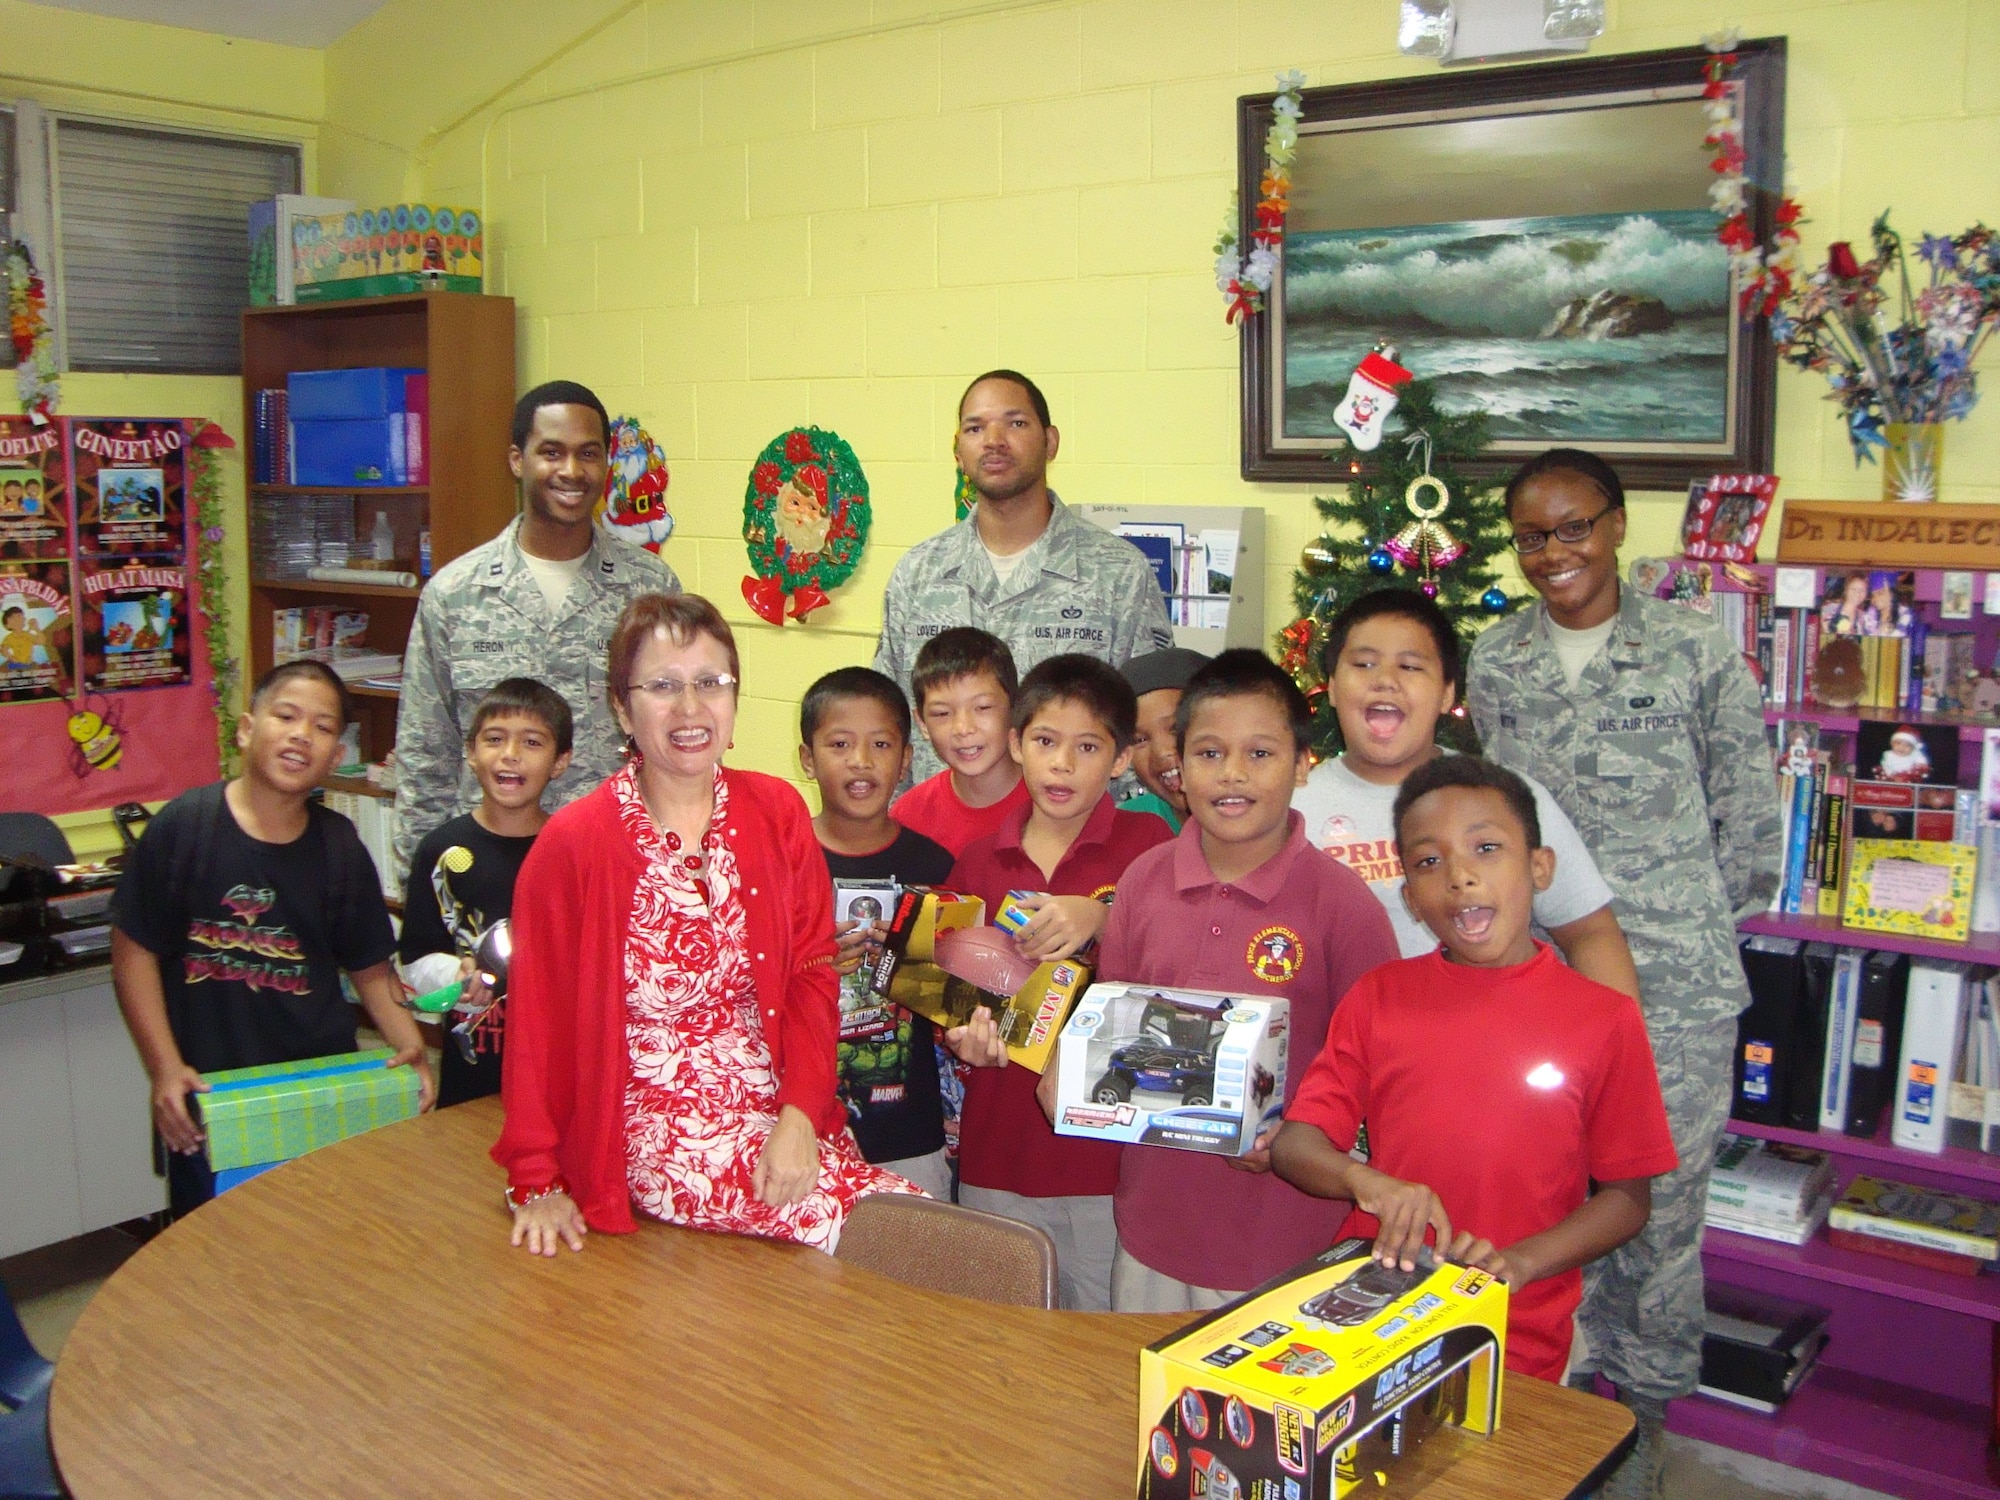 TAMUNING, Guam—Members from the Andersen African American Heritage Association give presents to local children at Tamuning Elementary School December 21, 2012. A collaboration between members of the AAHA and the Andersen Chapel gathered gifts for local children before the holiday season. A month of planning led to the formation of an Angel Tree donation system for children in the Big Brother, Big Sister Organization. (Contributed Photo)